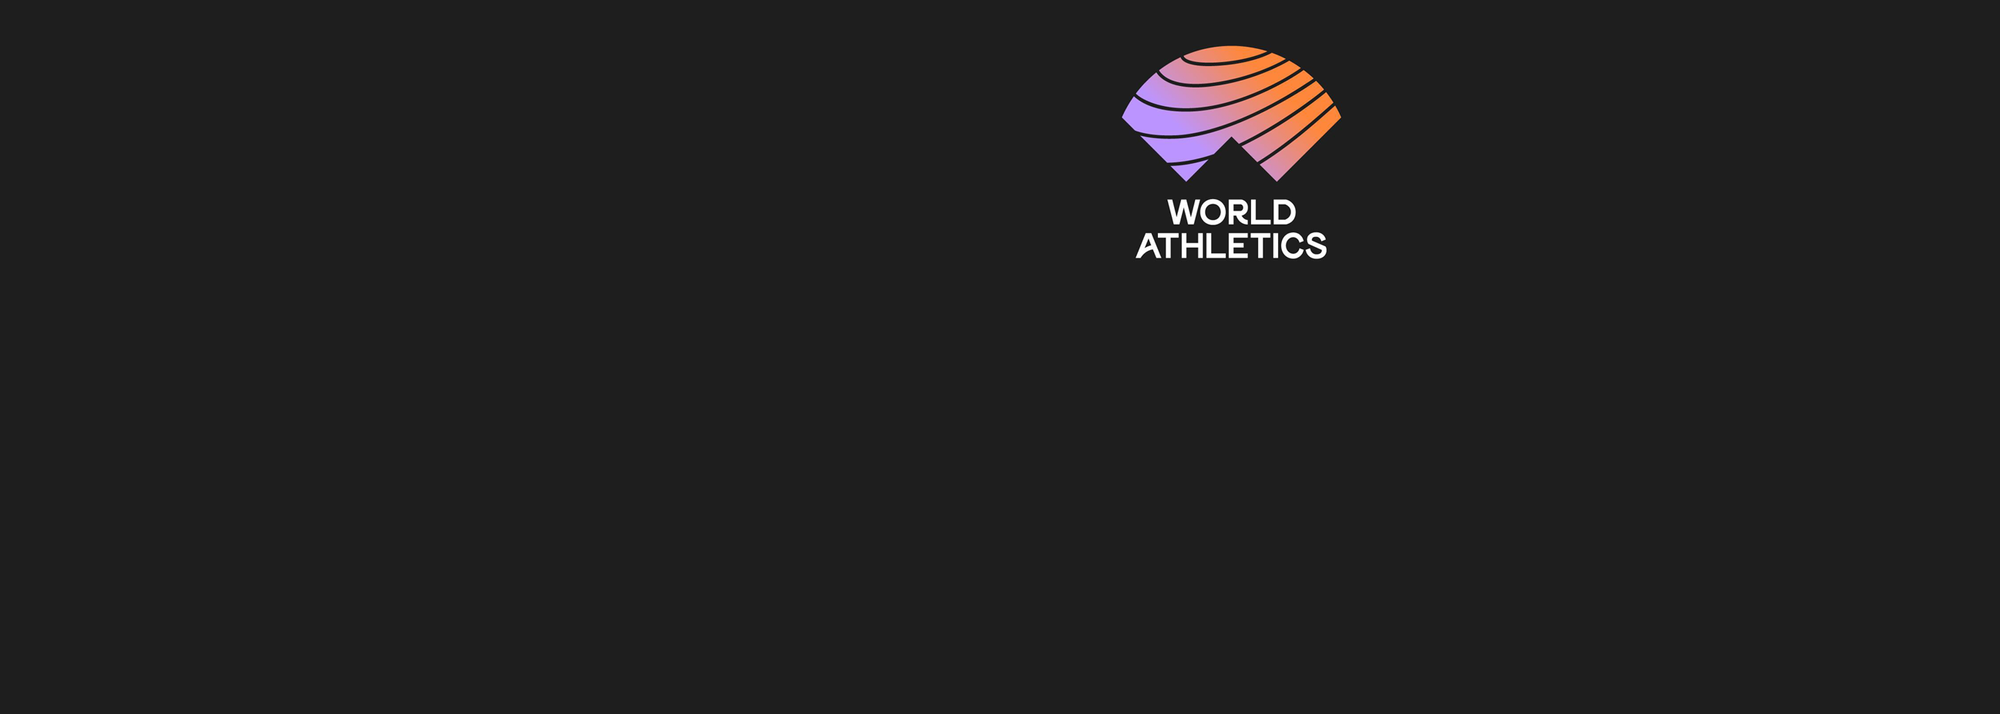 World Athletics is looking for an Assistant to the Director of International Relations & Development.